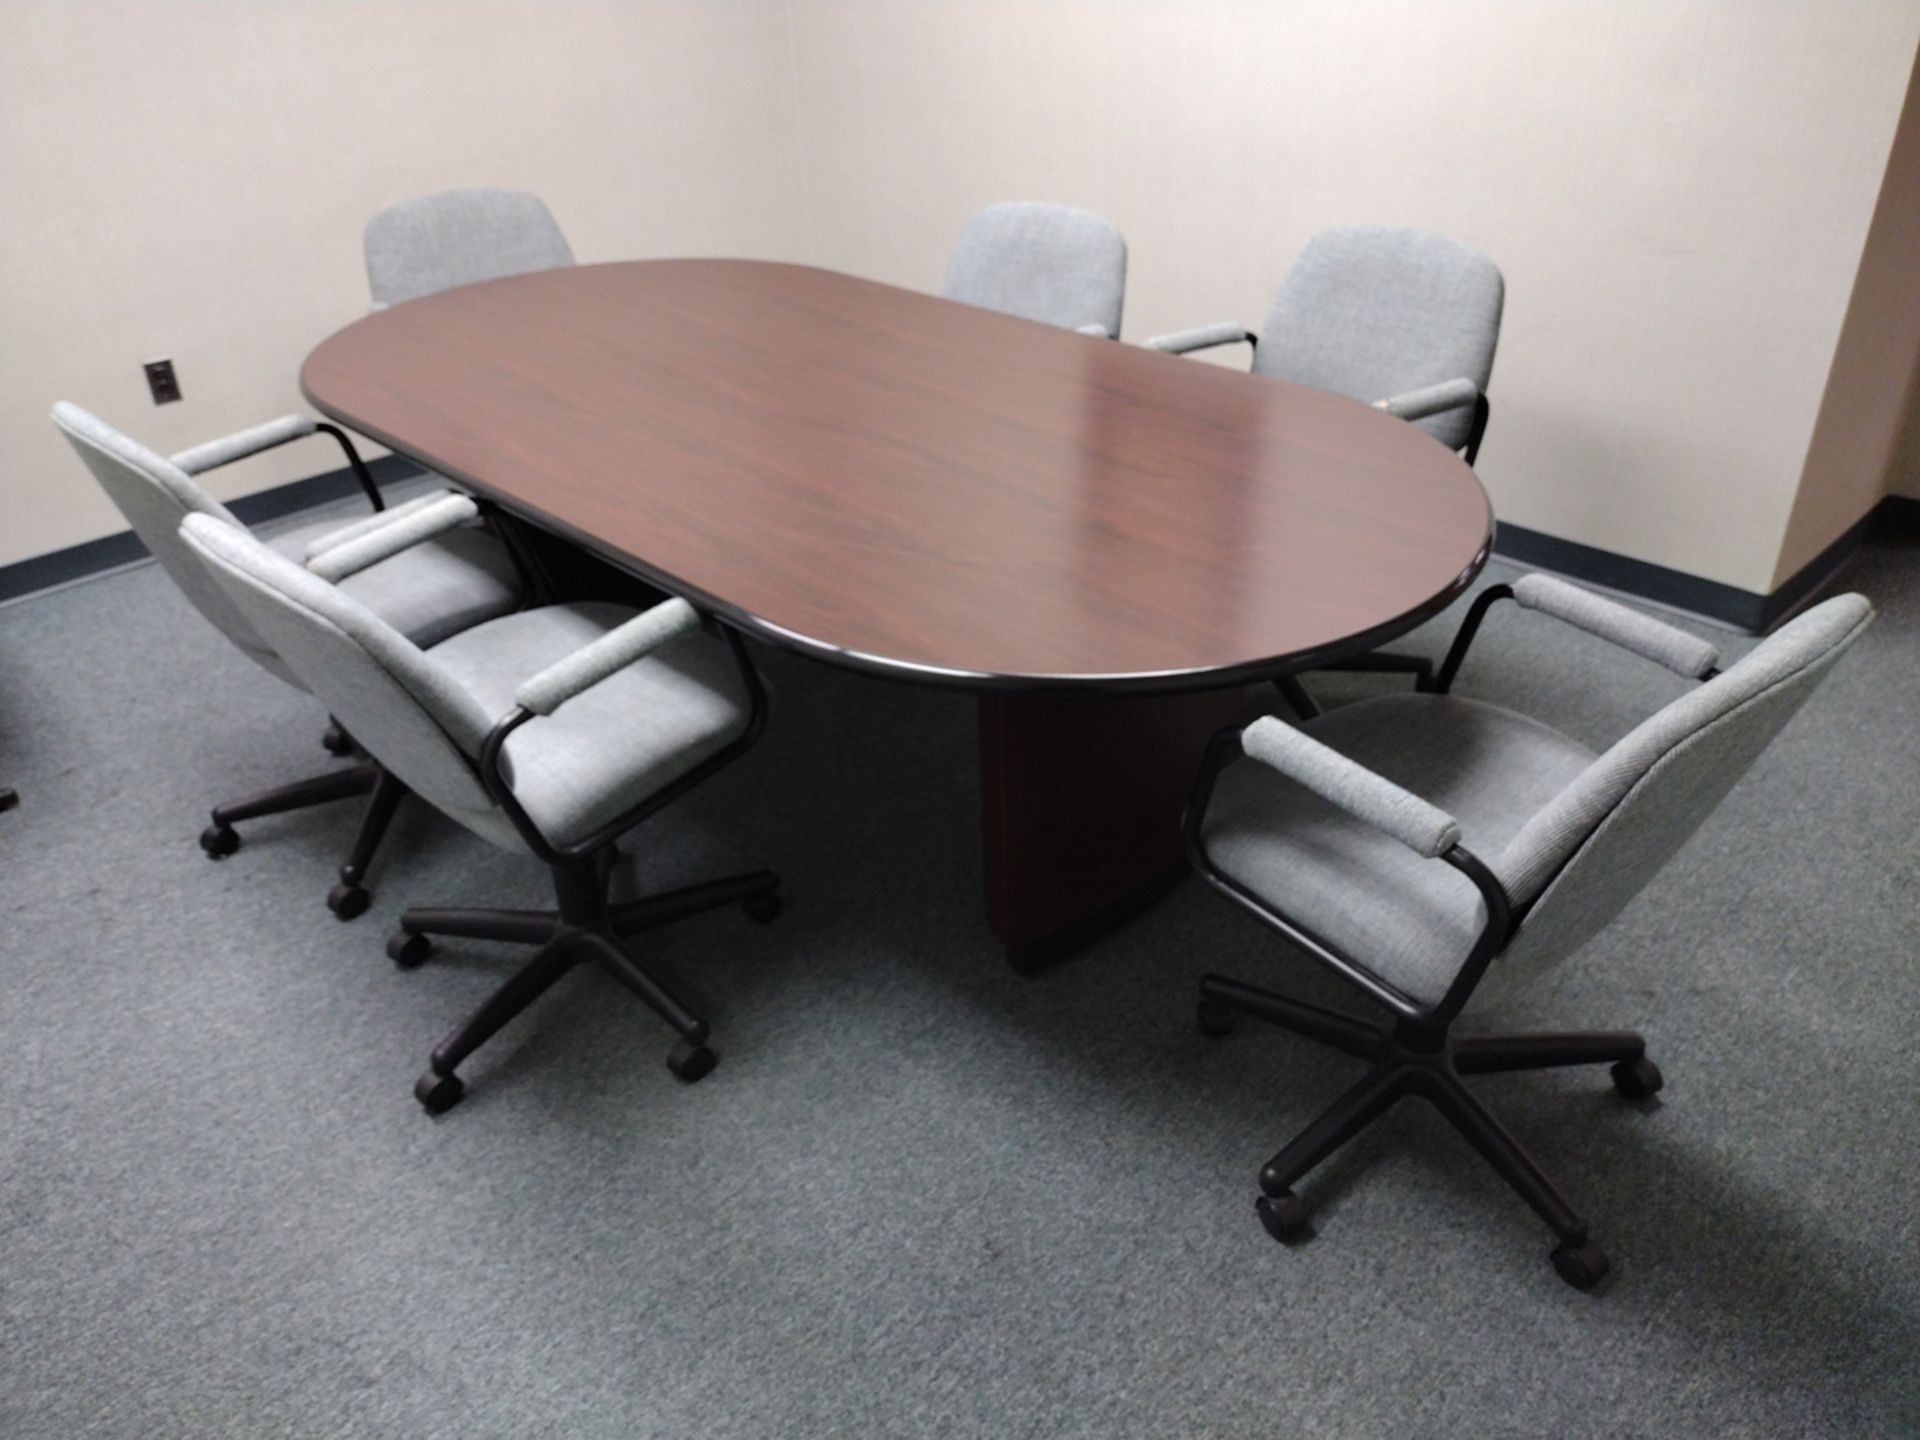 8ft Wood Laminate Conference Table w/ Chairs